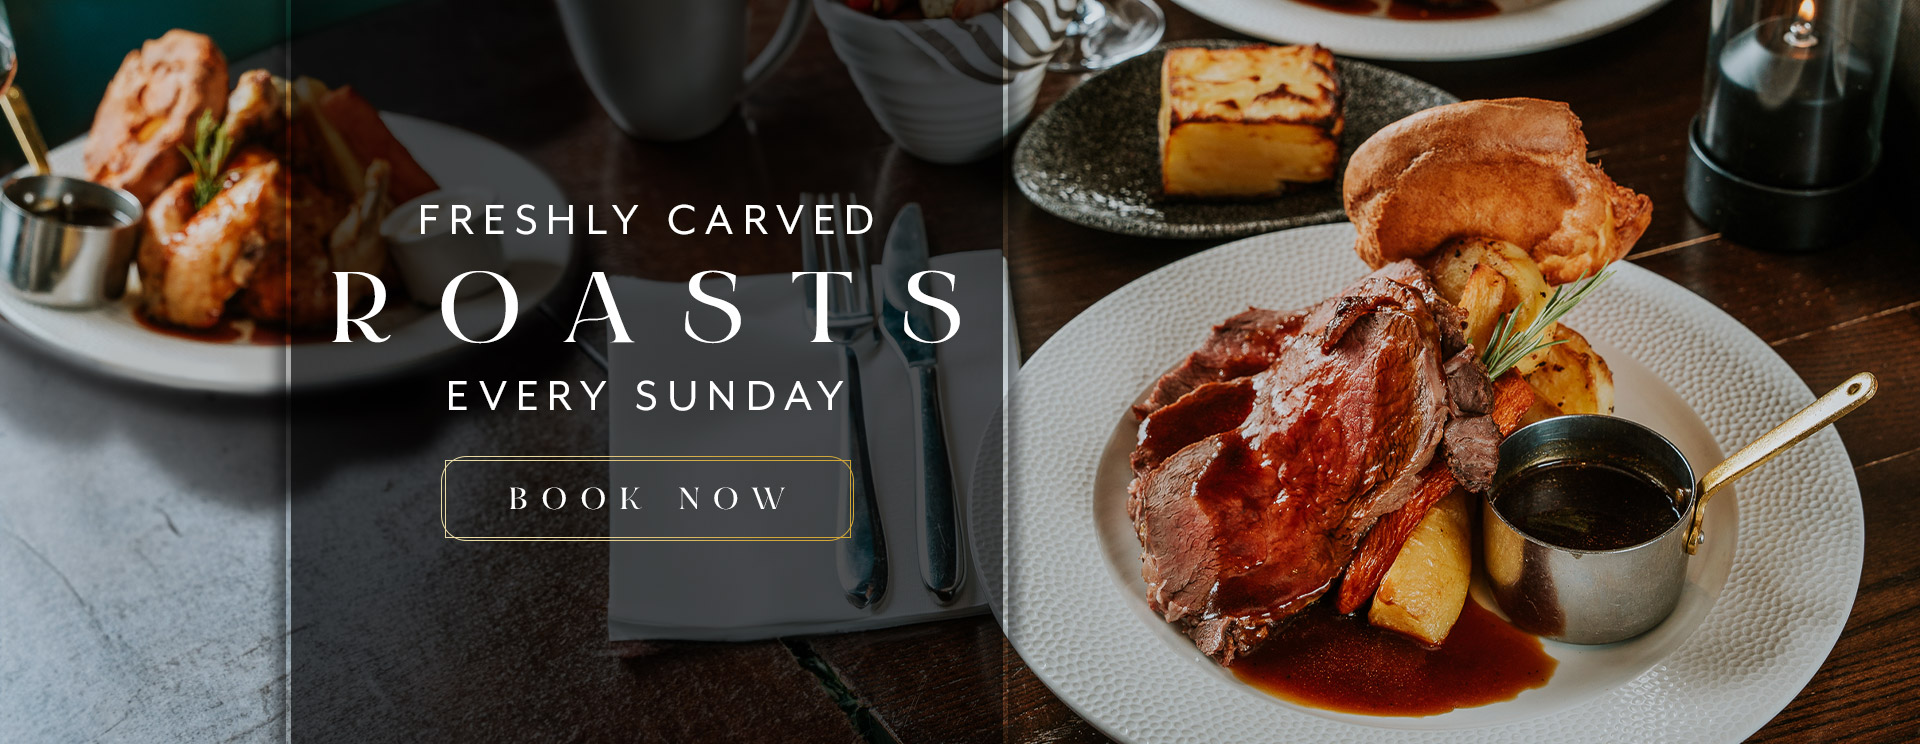 Sunday Lunch at The Chilworth Arms